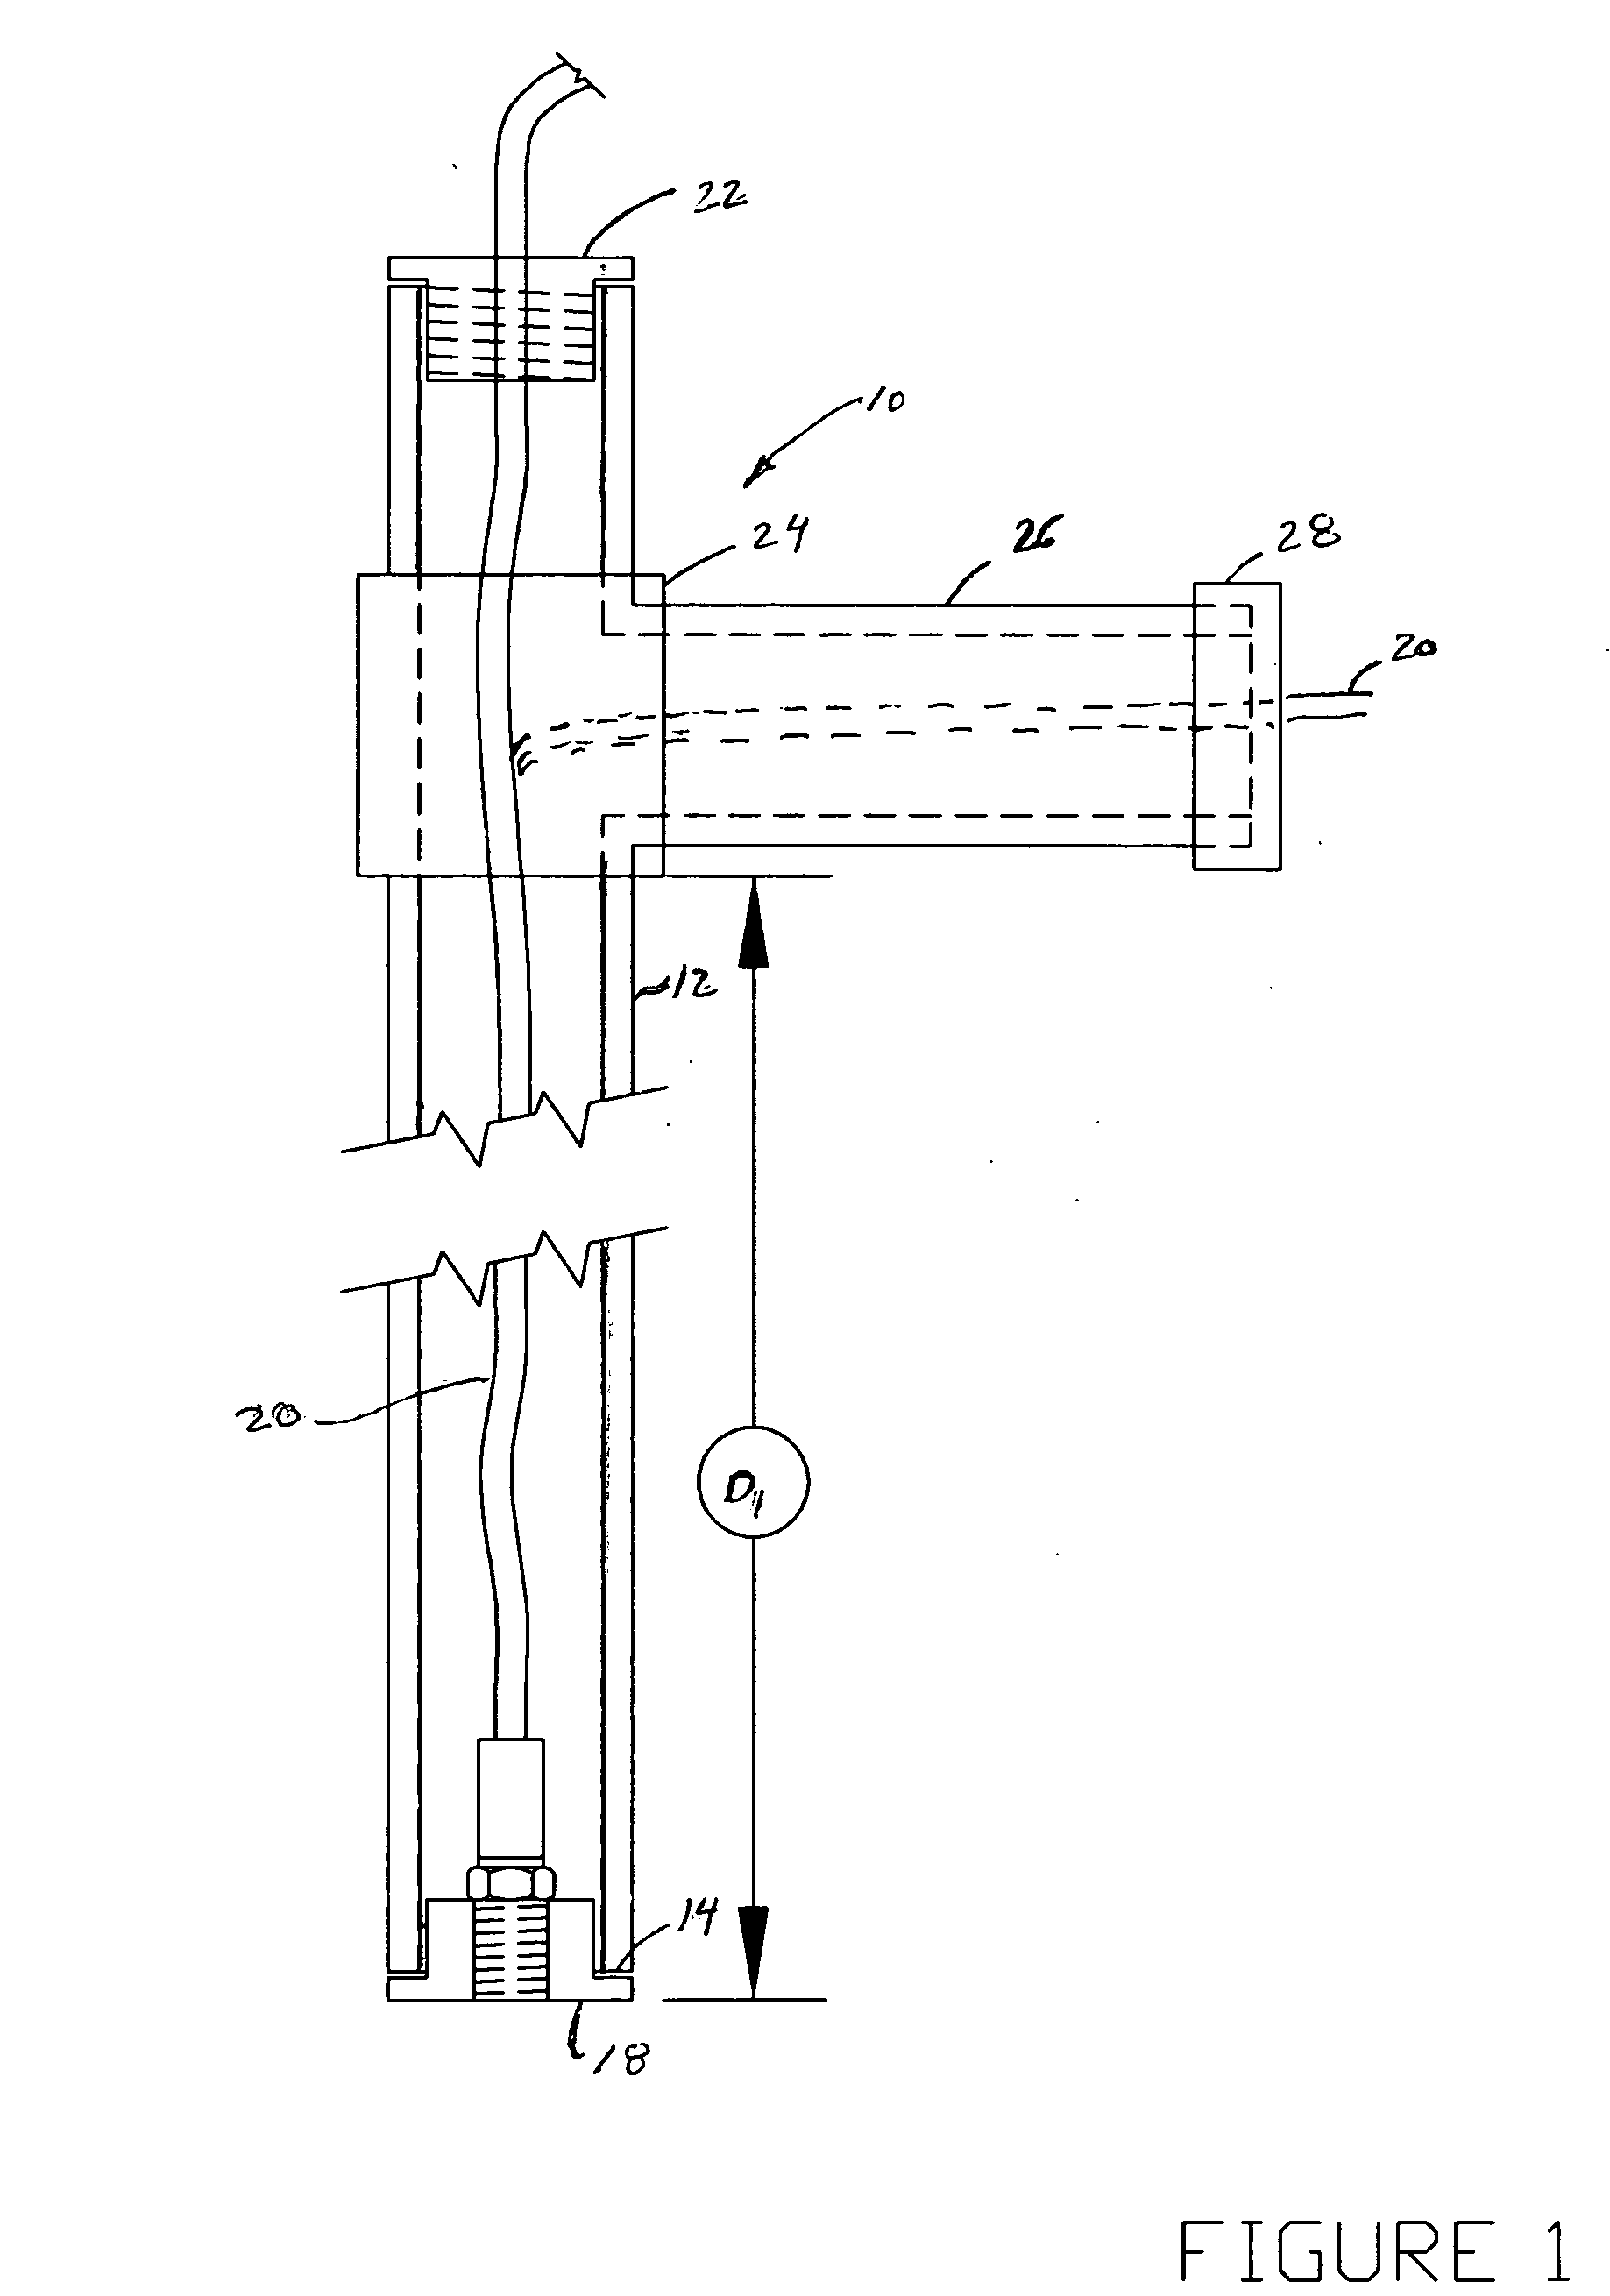 Method and apparatus for measuring the draft of a vessel